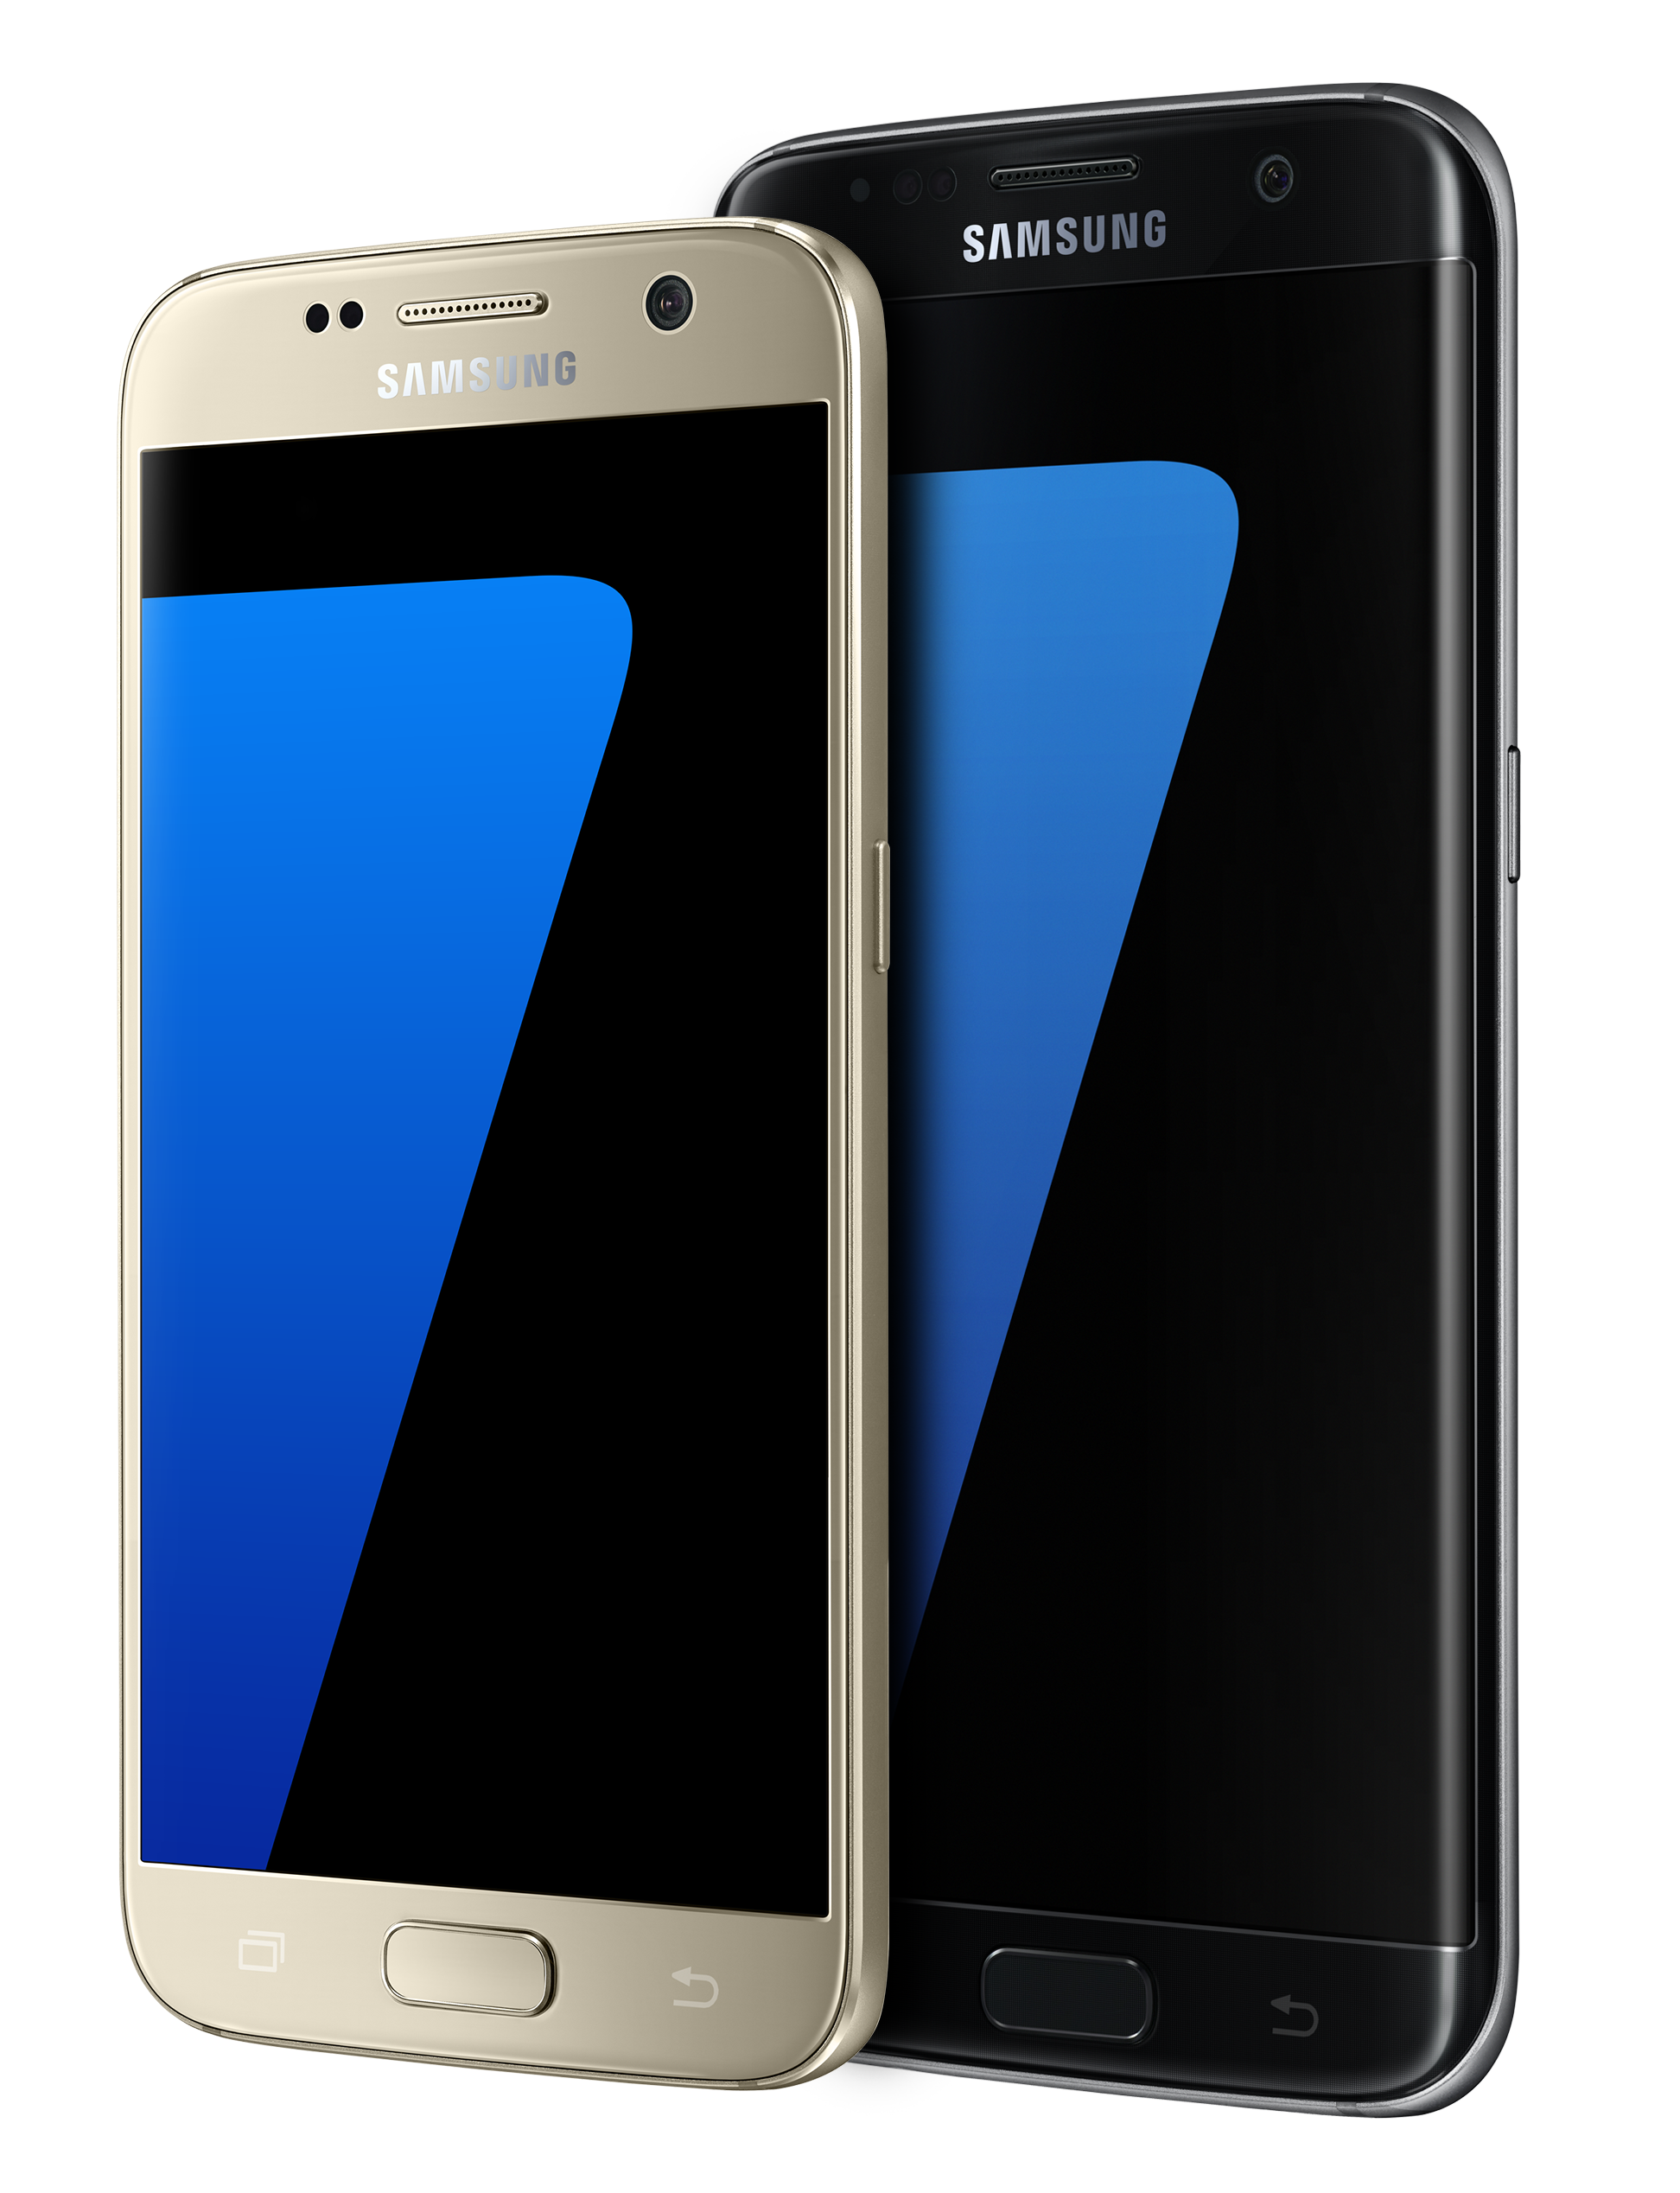 bescherming Doorzichtig Concessie Samsung Galaxy S7 and Galaxy S7 edge official with new camera, expandable  storage, and more - SamMobile - SamMobile